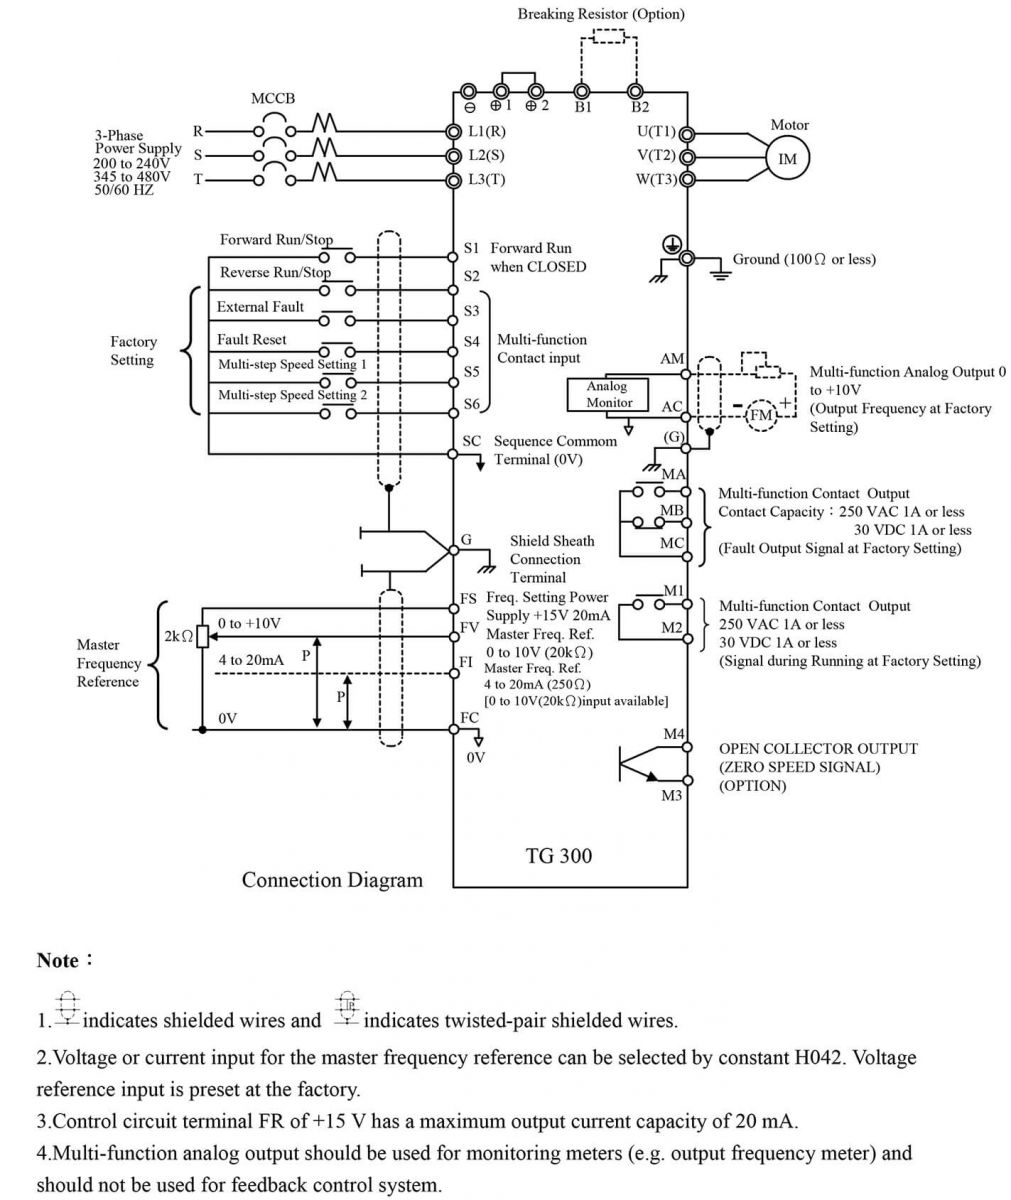 TOP GIN-TG300 General Frequency Inverter Connection Diagram